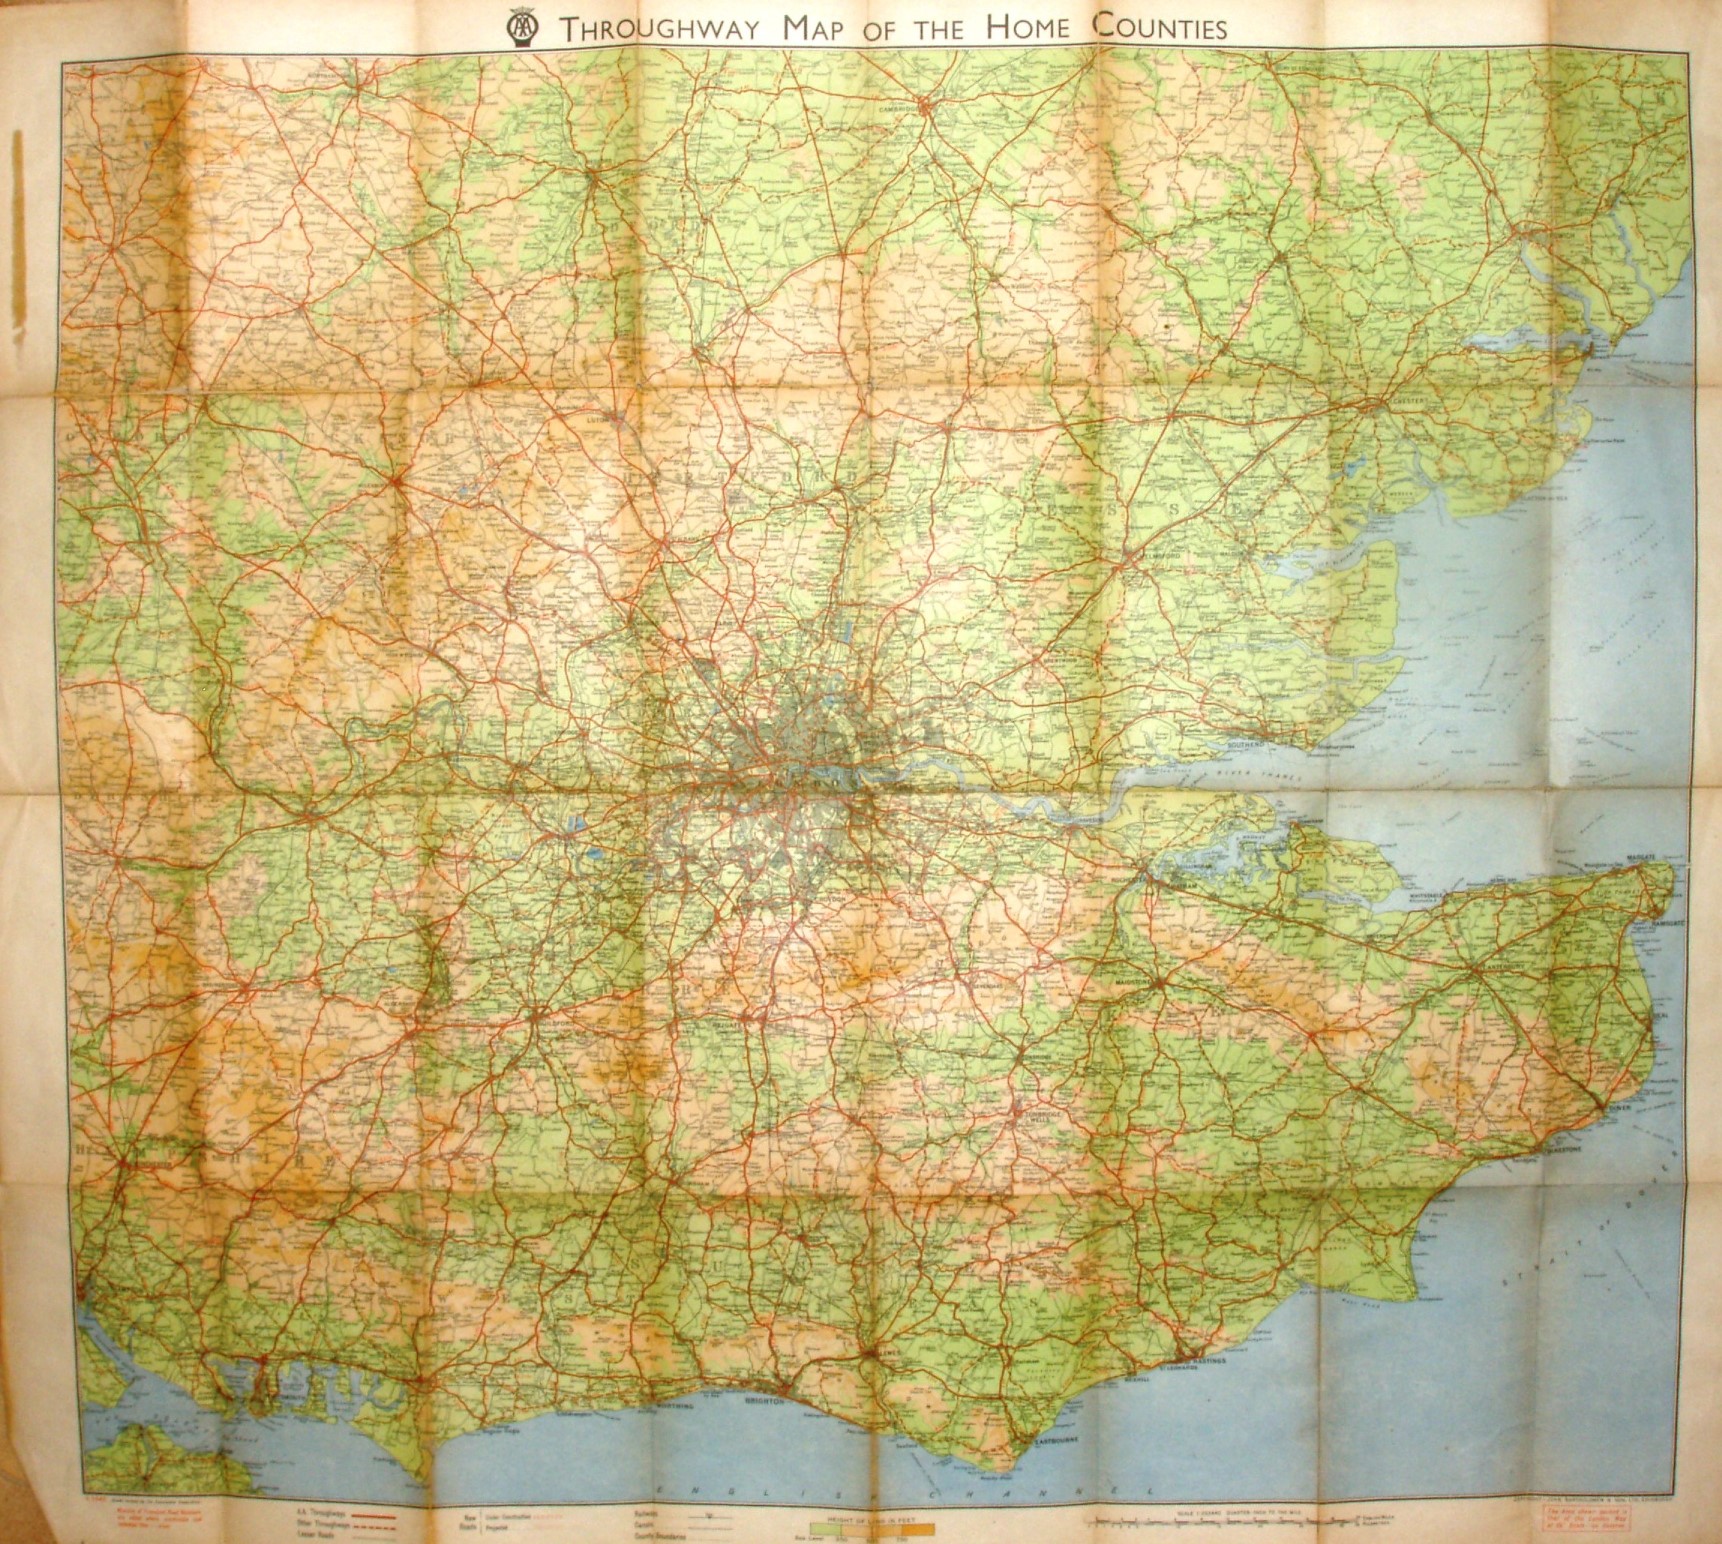 AA 1948, Throughway map of the Home Counties